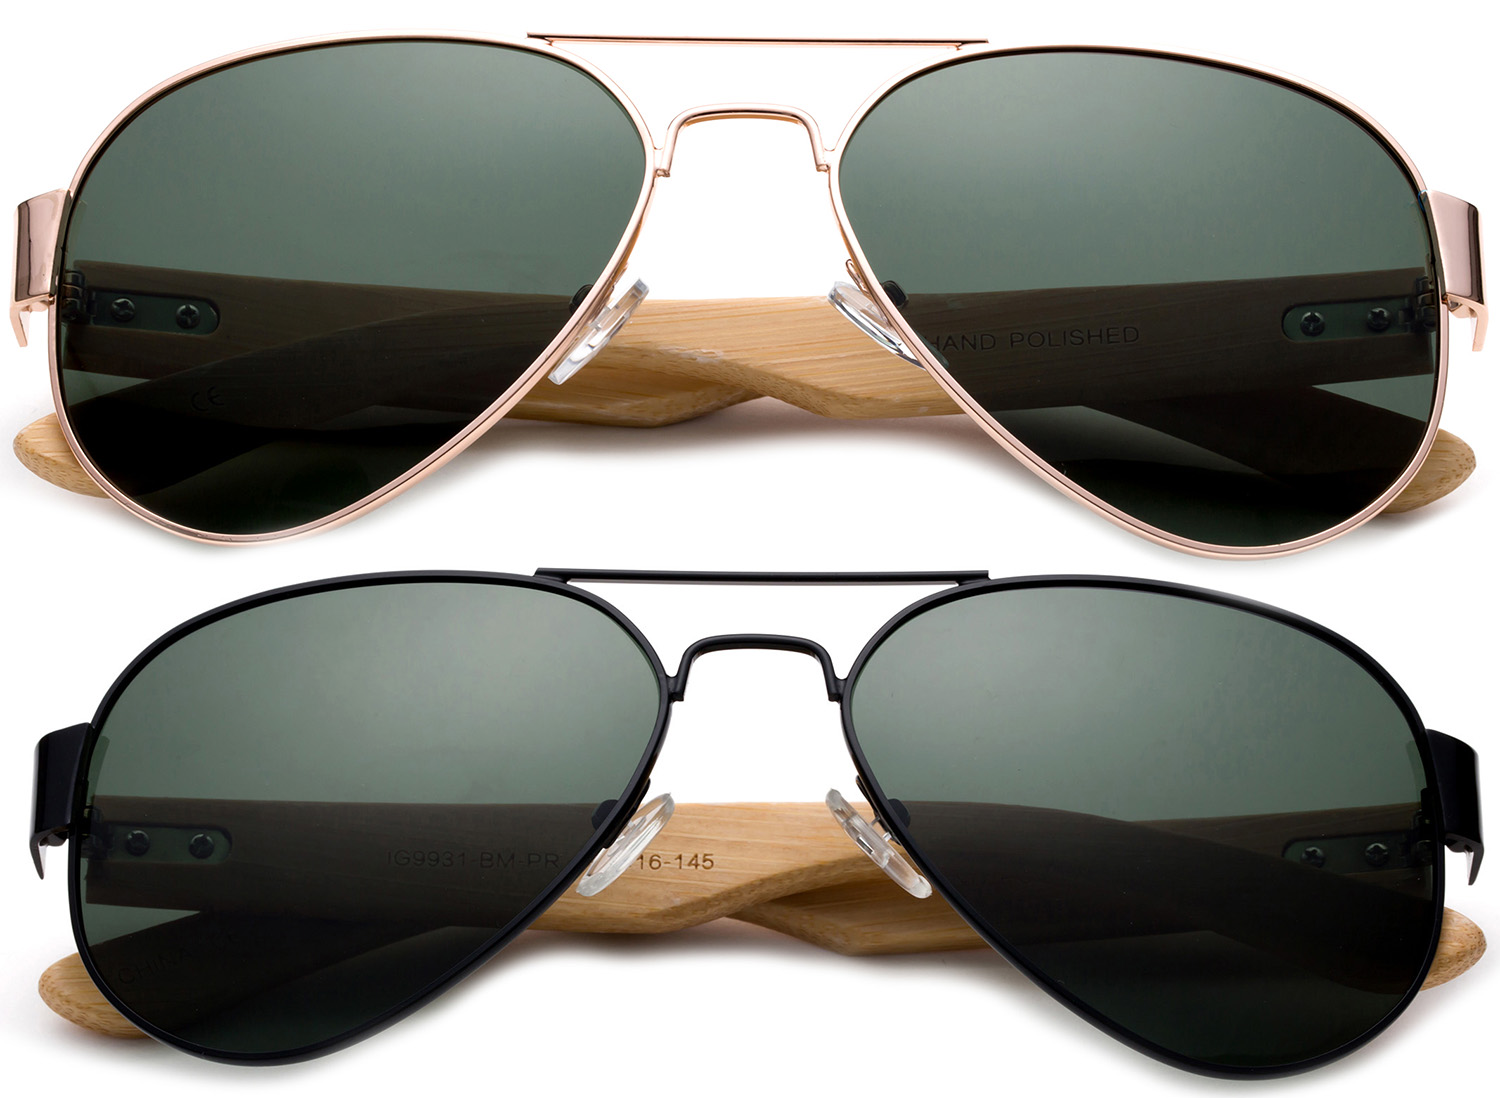 High Qaulity Polarized Sunglasses with Real Bamboo Arm Aviator Sunglasses Bamboo Sunglasses for Men & Women - image 1 of 1